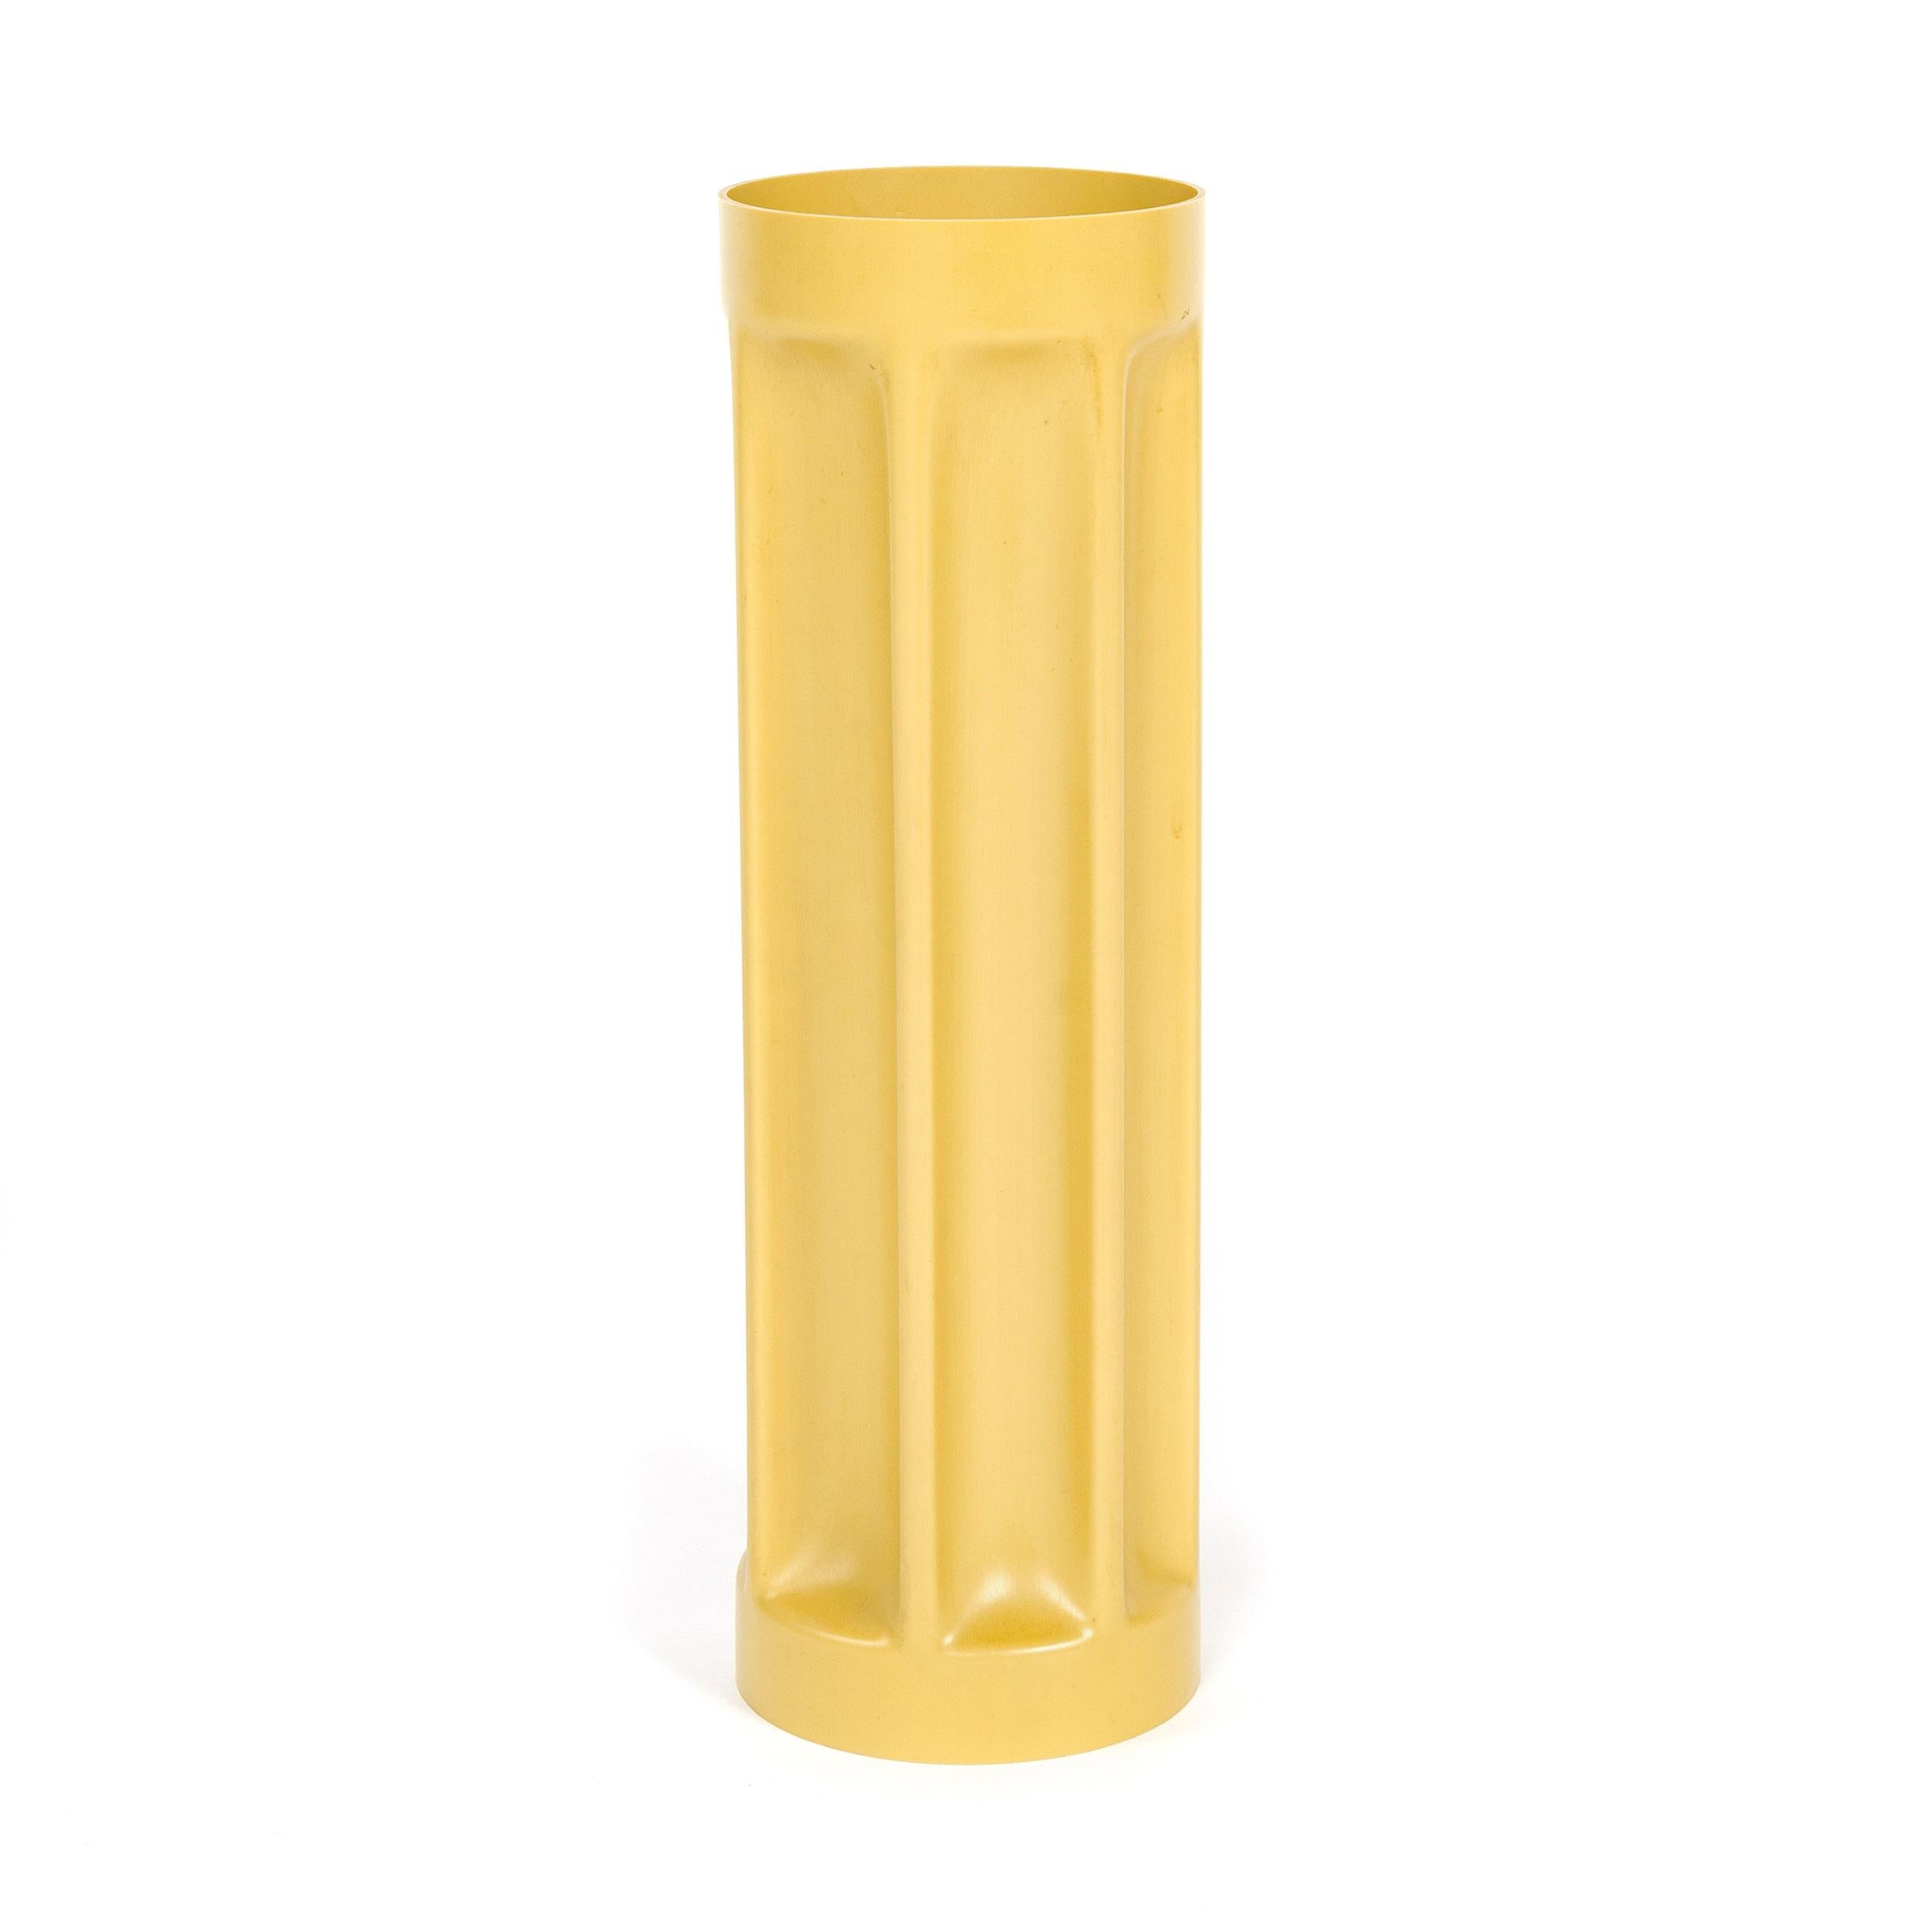 From the 'Bambu' series, a pressure-casted PVC vase in yellow ochre. Model 3084A.